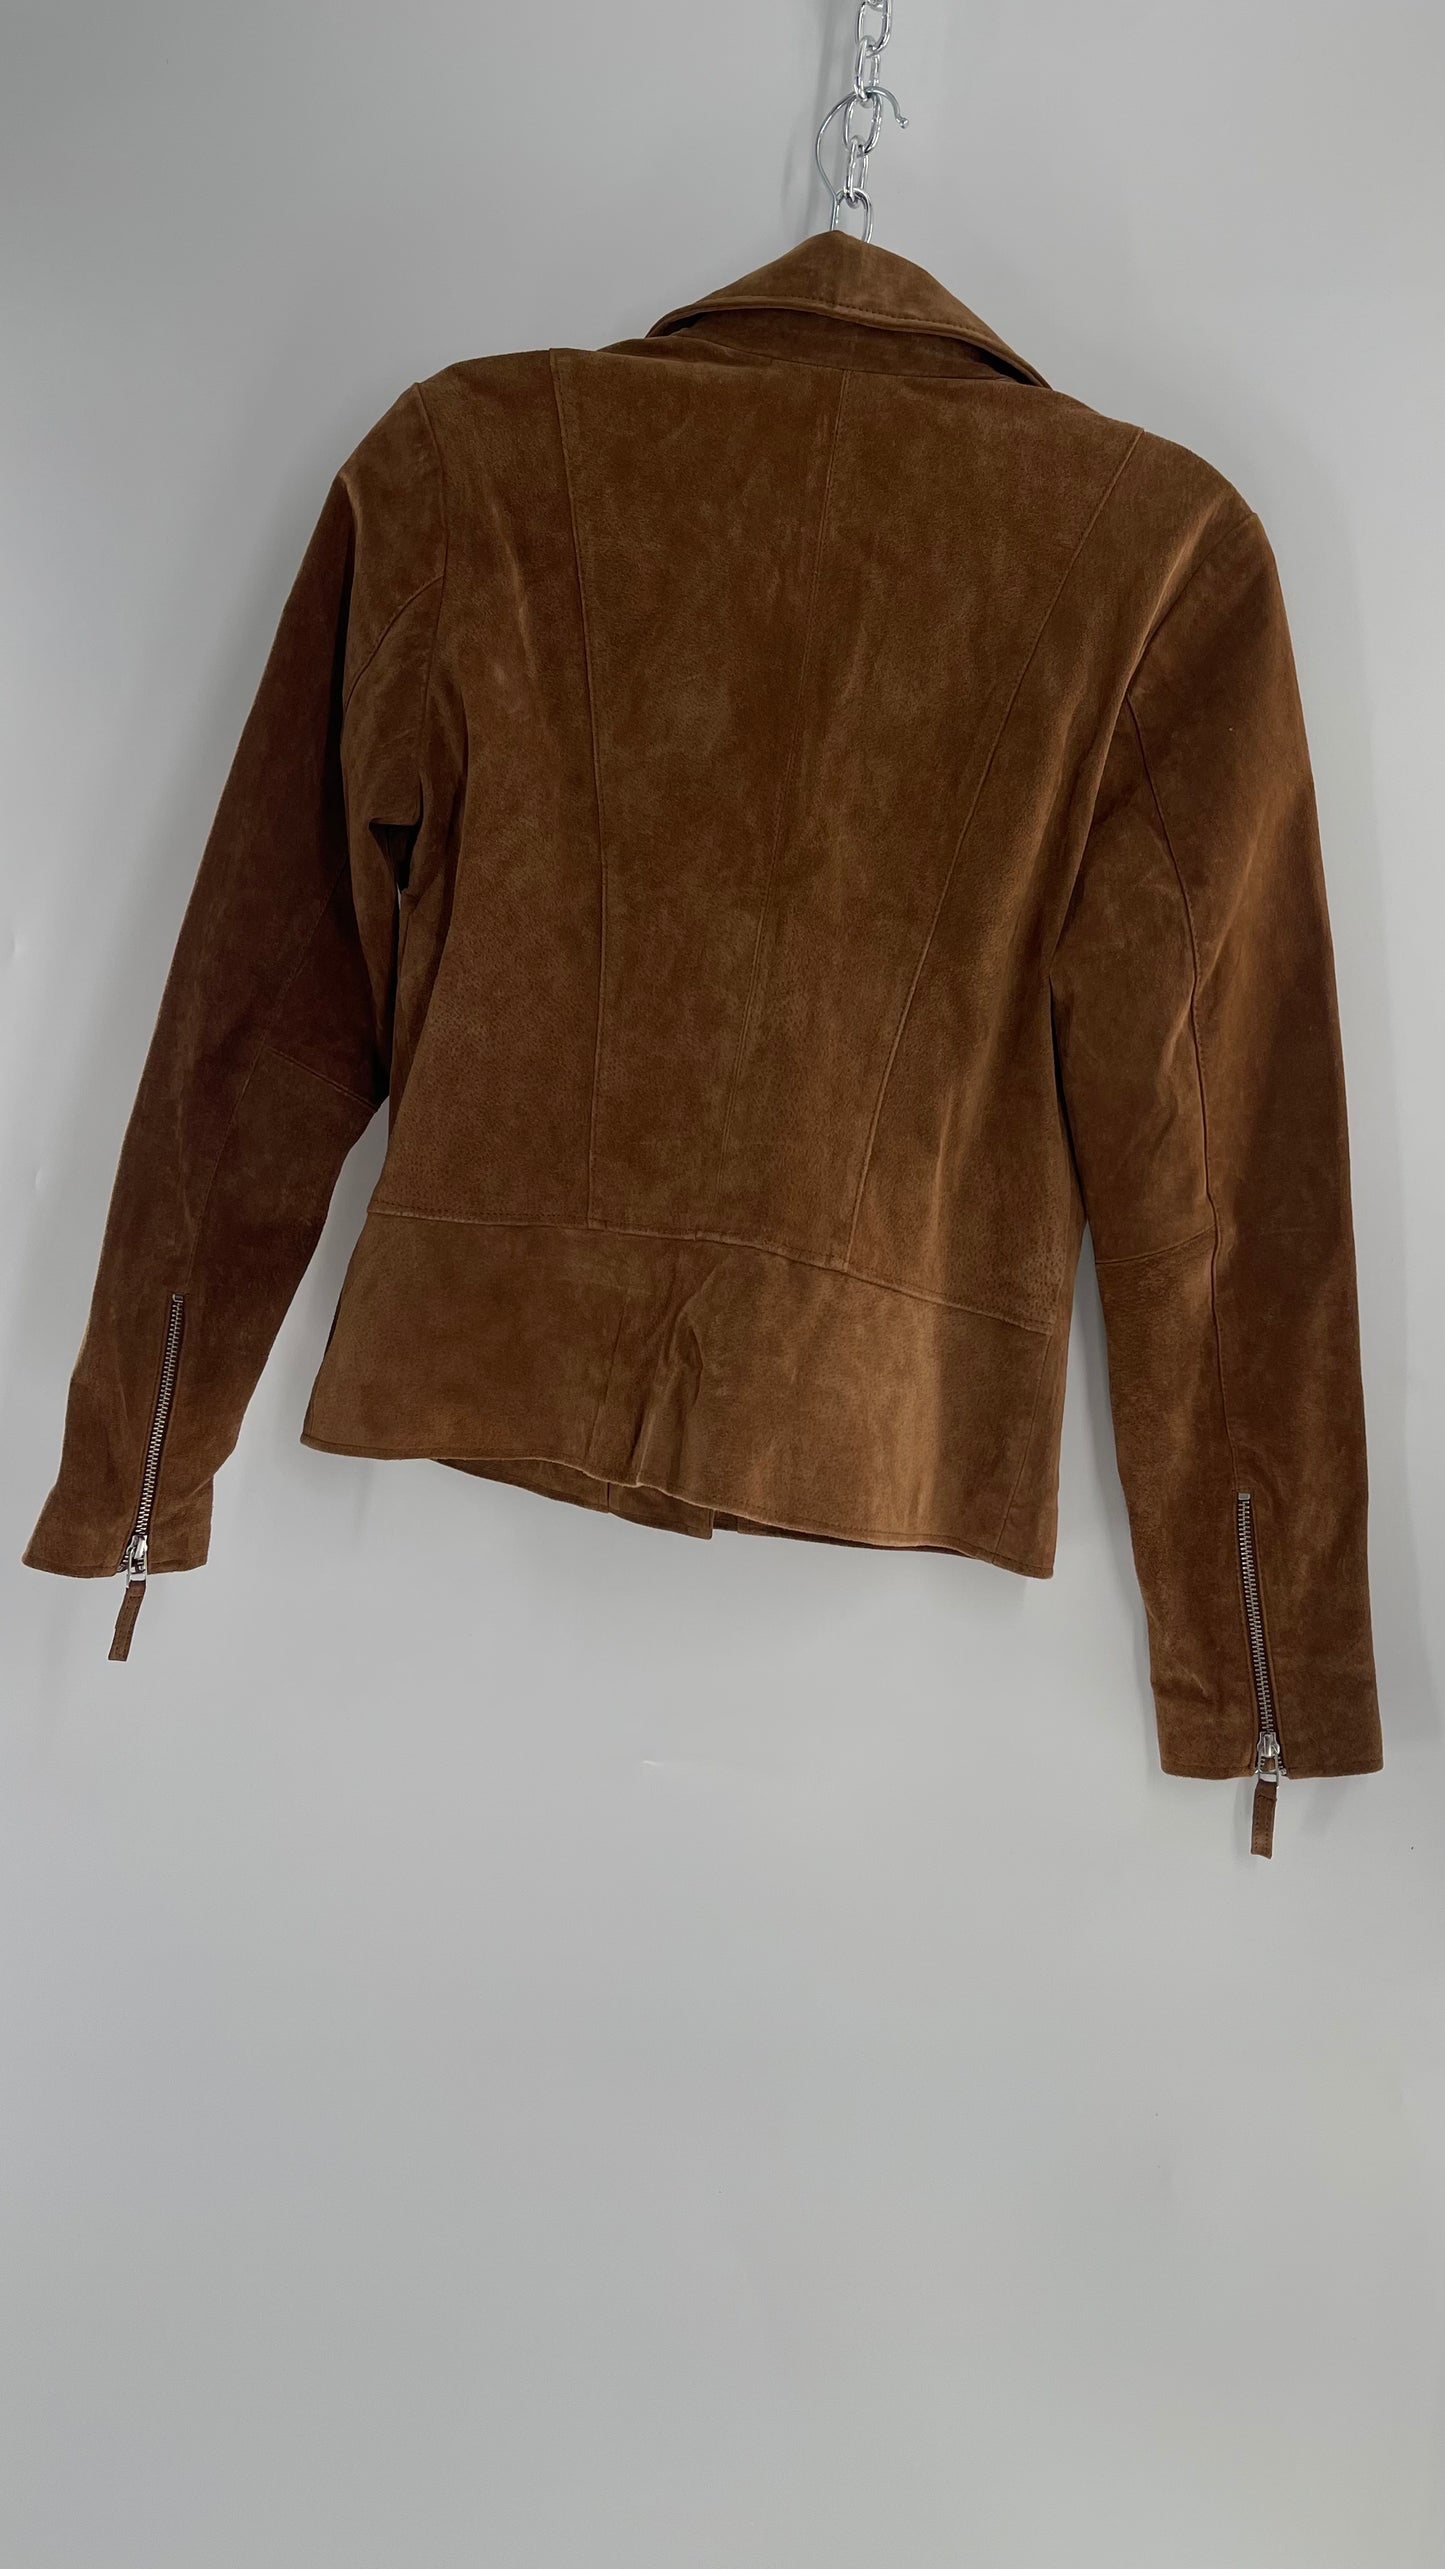 Vintage ESCALIER Brown Genuine Leather Suede Motorcycle Jacket with Heavy Duty Zippers (Medium)